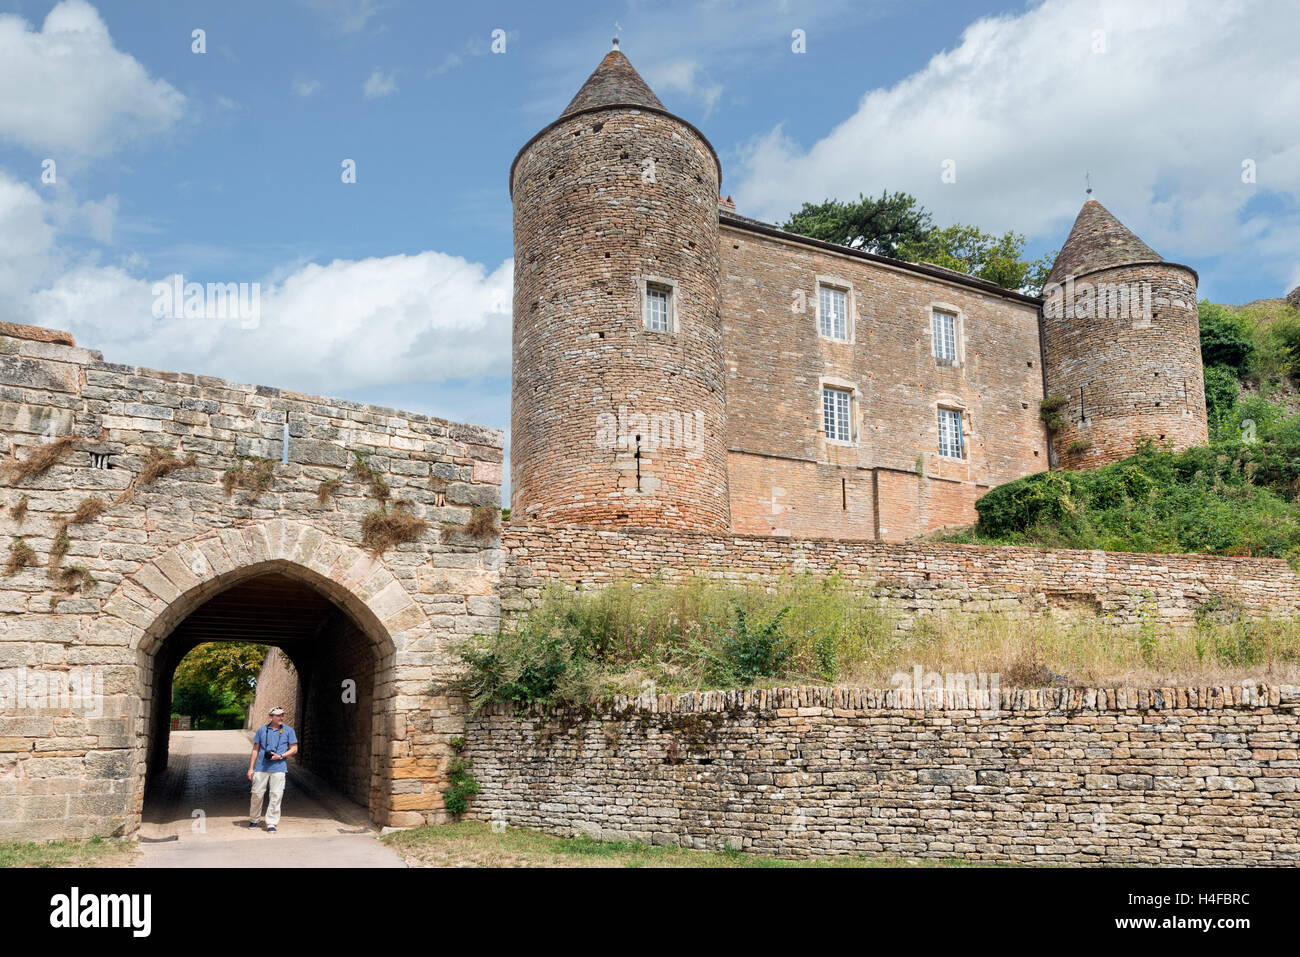 A visitor walking through the tunnel entrance to Chateau de Brancion & historic village in Saone et Loire, Burgundy, France Stock Photo